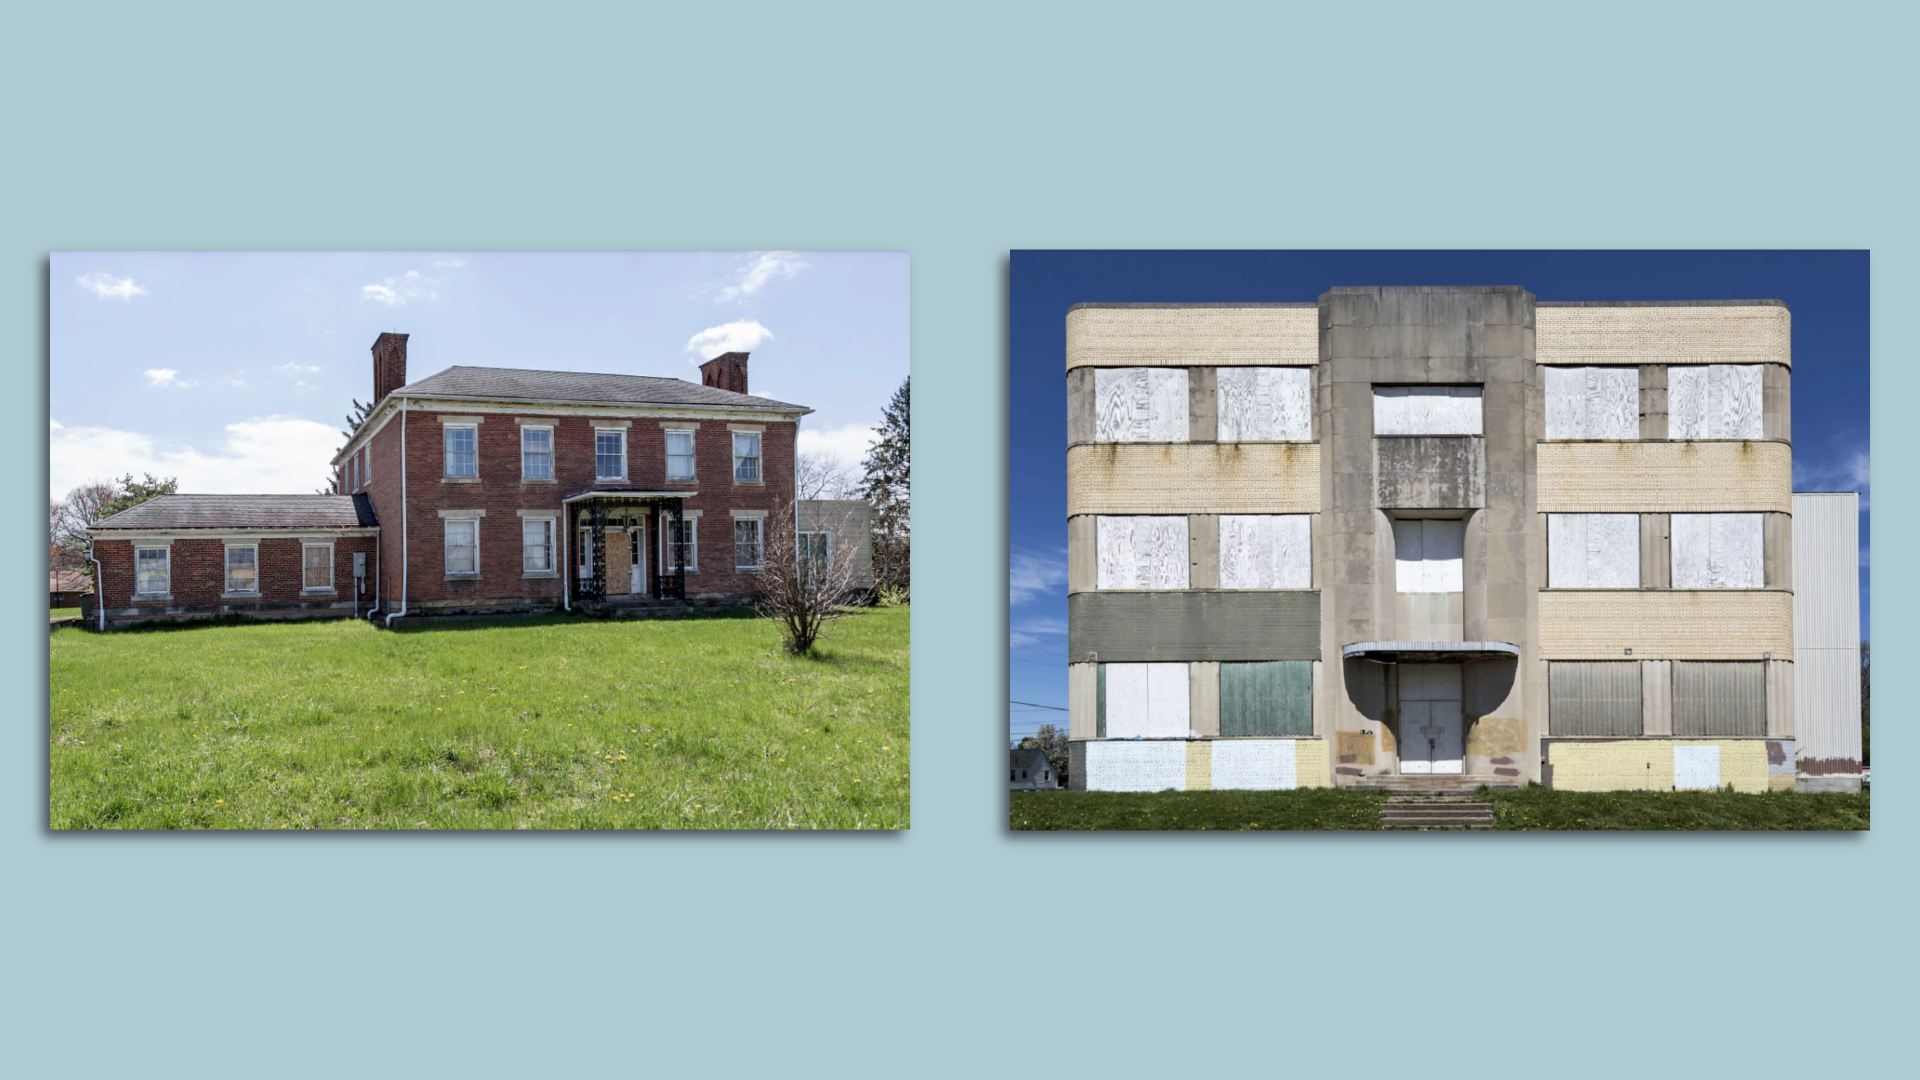 Side-by-side of two vacant, historic buildings.